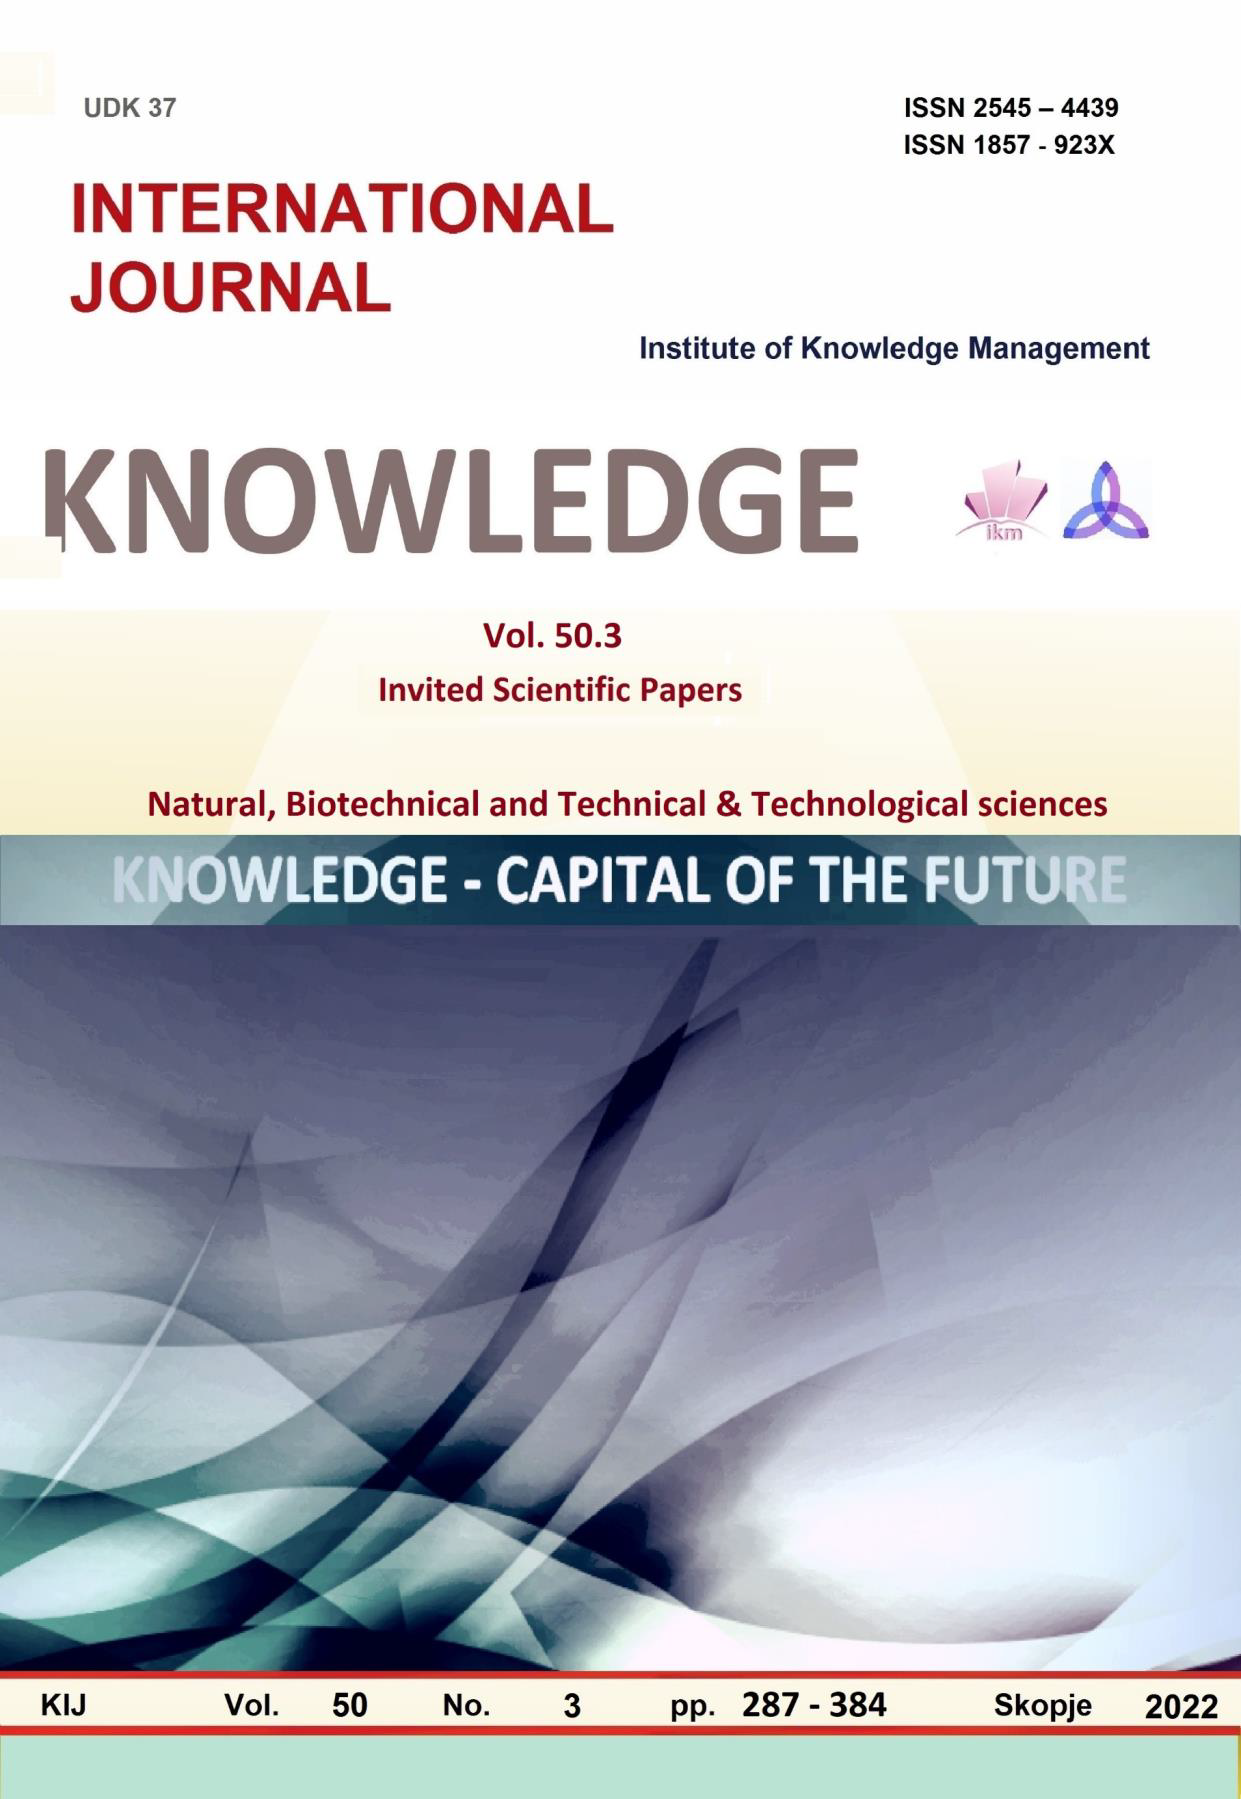 					View Vol. 50 No. 3 (2022): Knowledge - Capital Of The Future
				